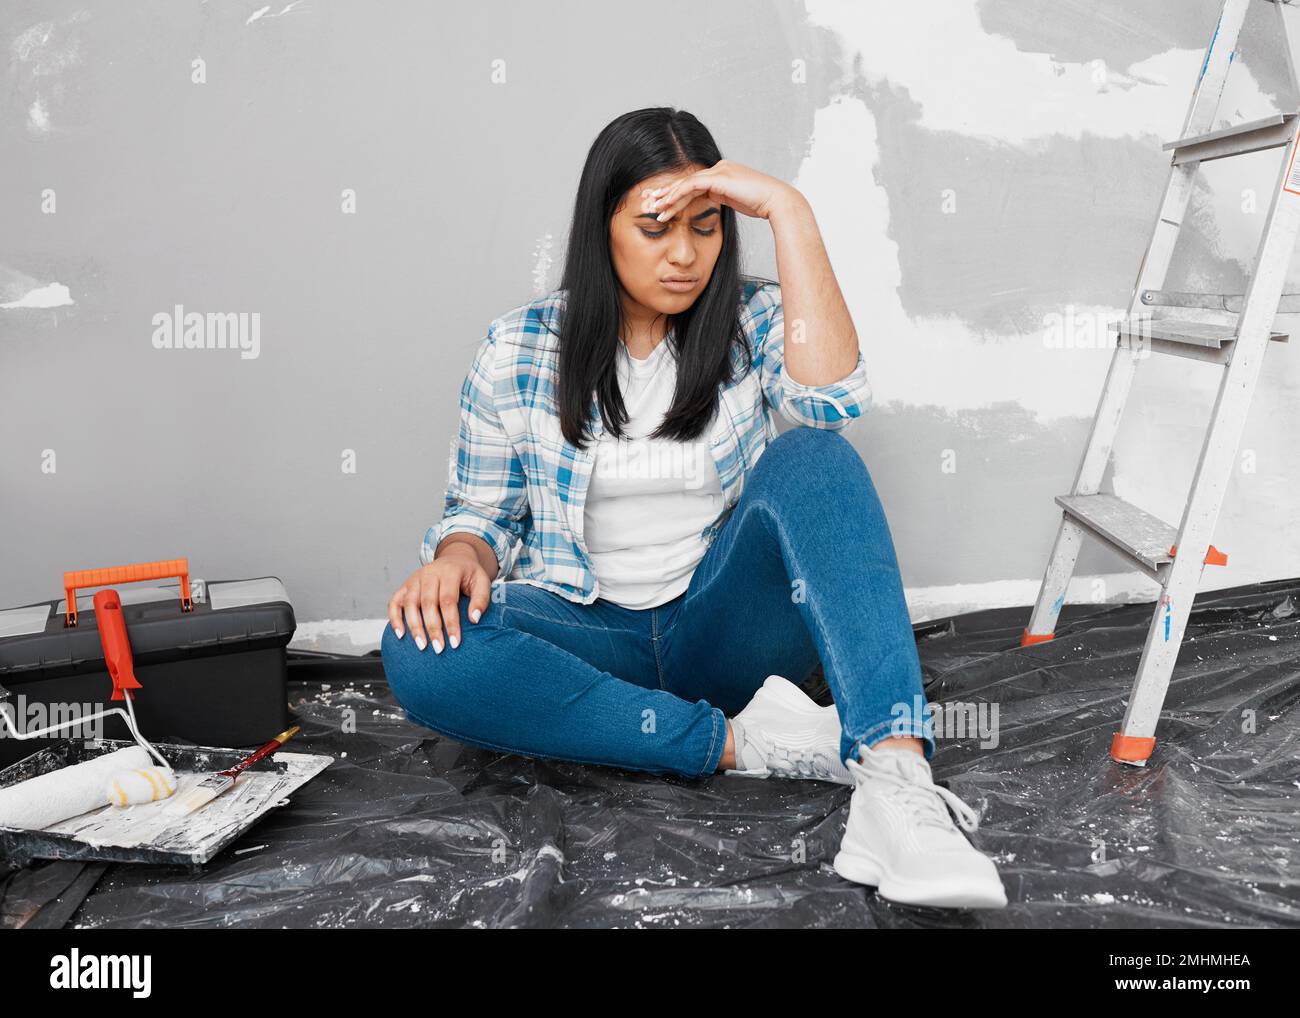 Young Indian woman frustrated, stuck with home DIY project Stock Photo